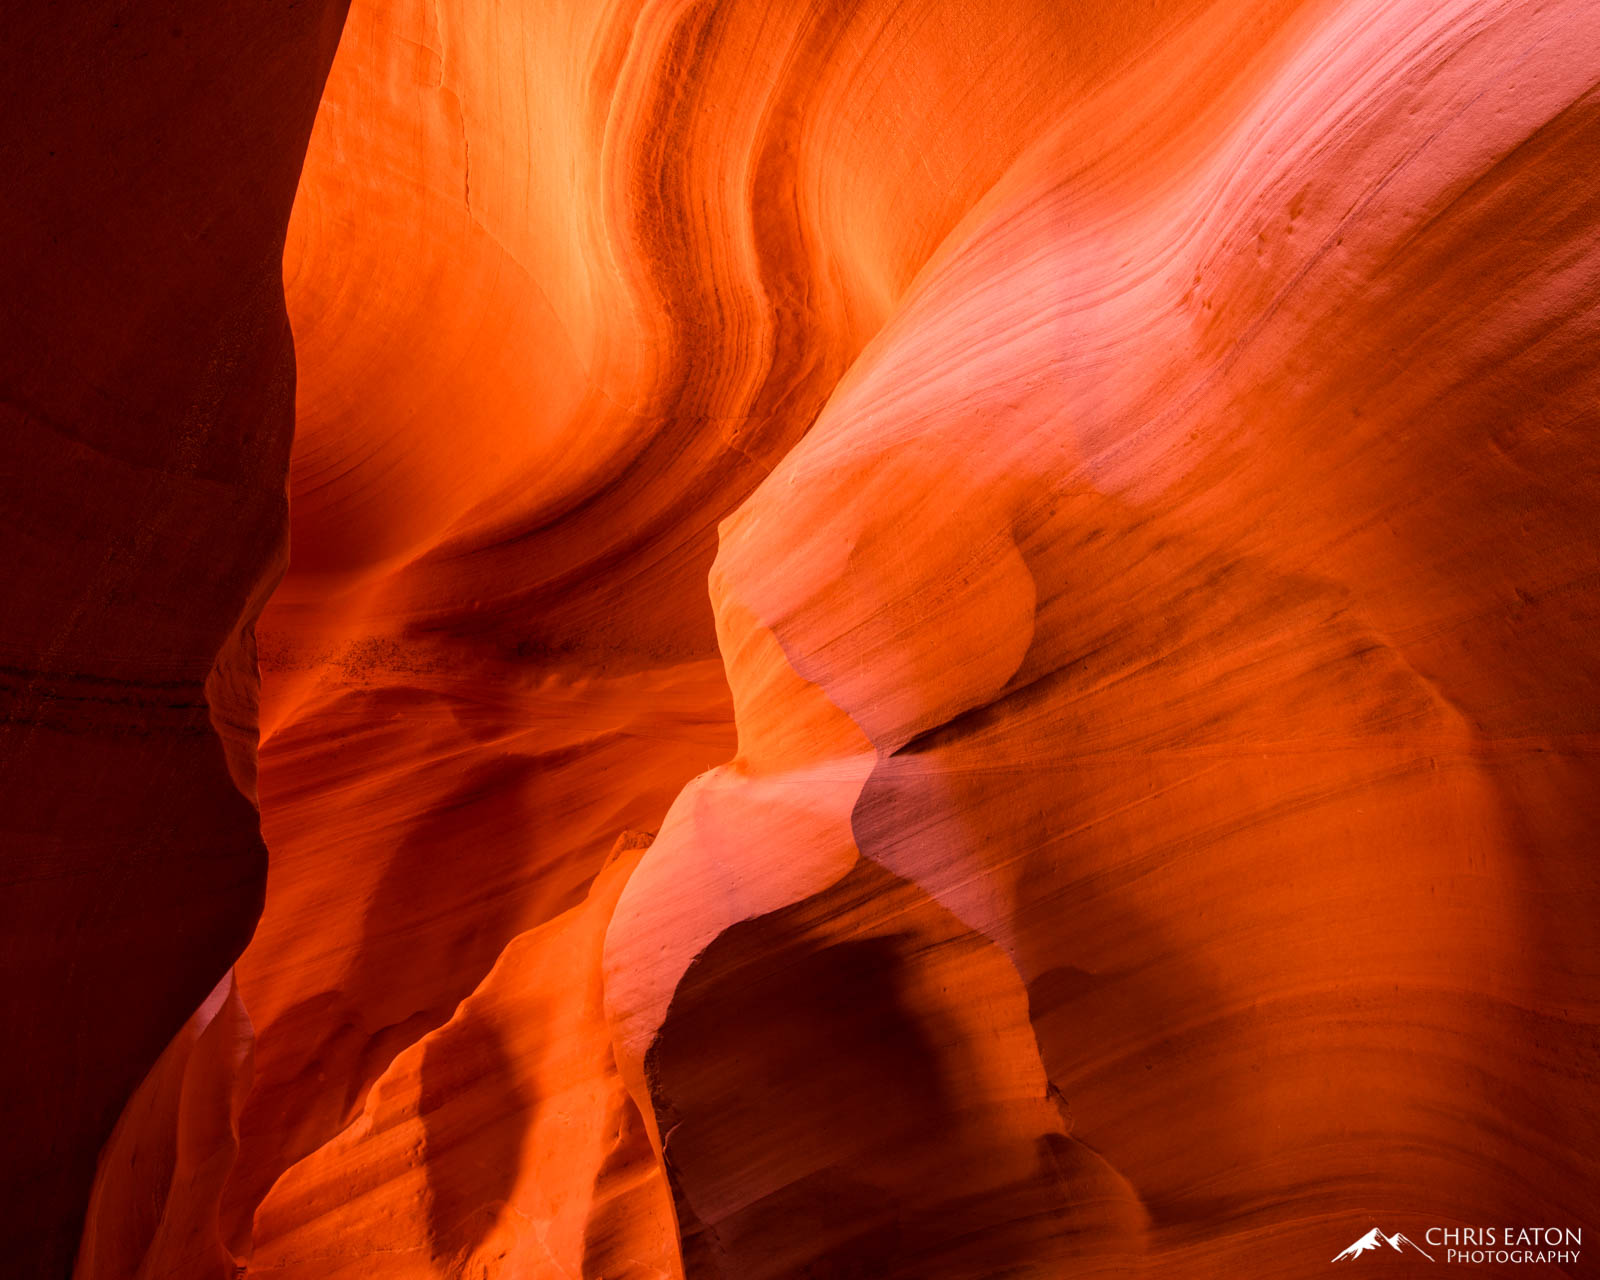 Canyon X is divided into two distinct slot canyons. While the lower canyon is deep where sunlight must reflect several times...